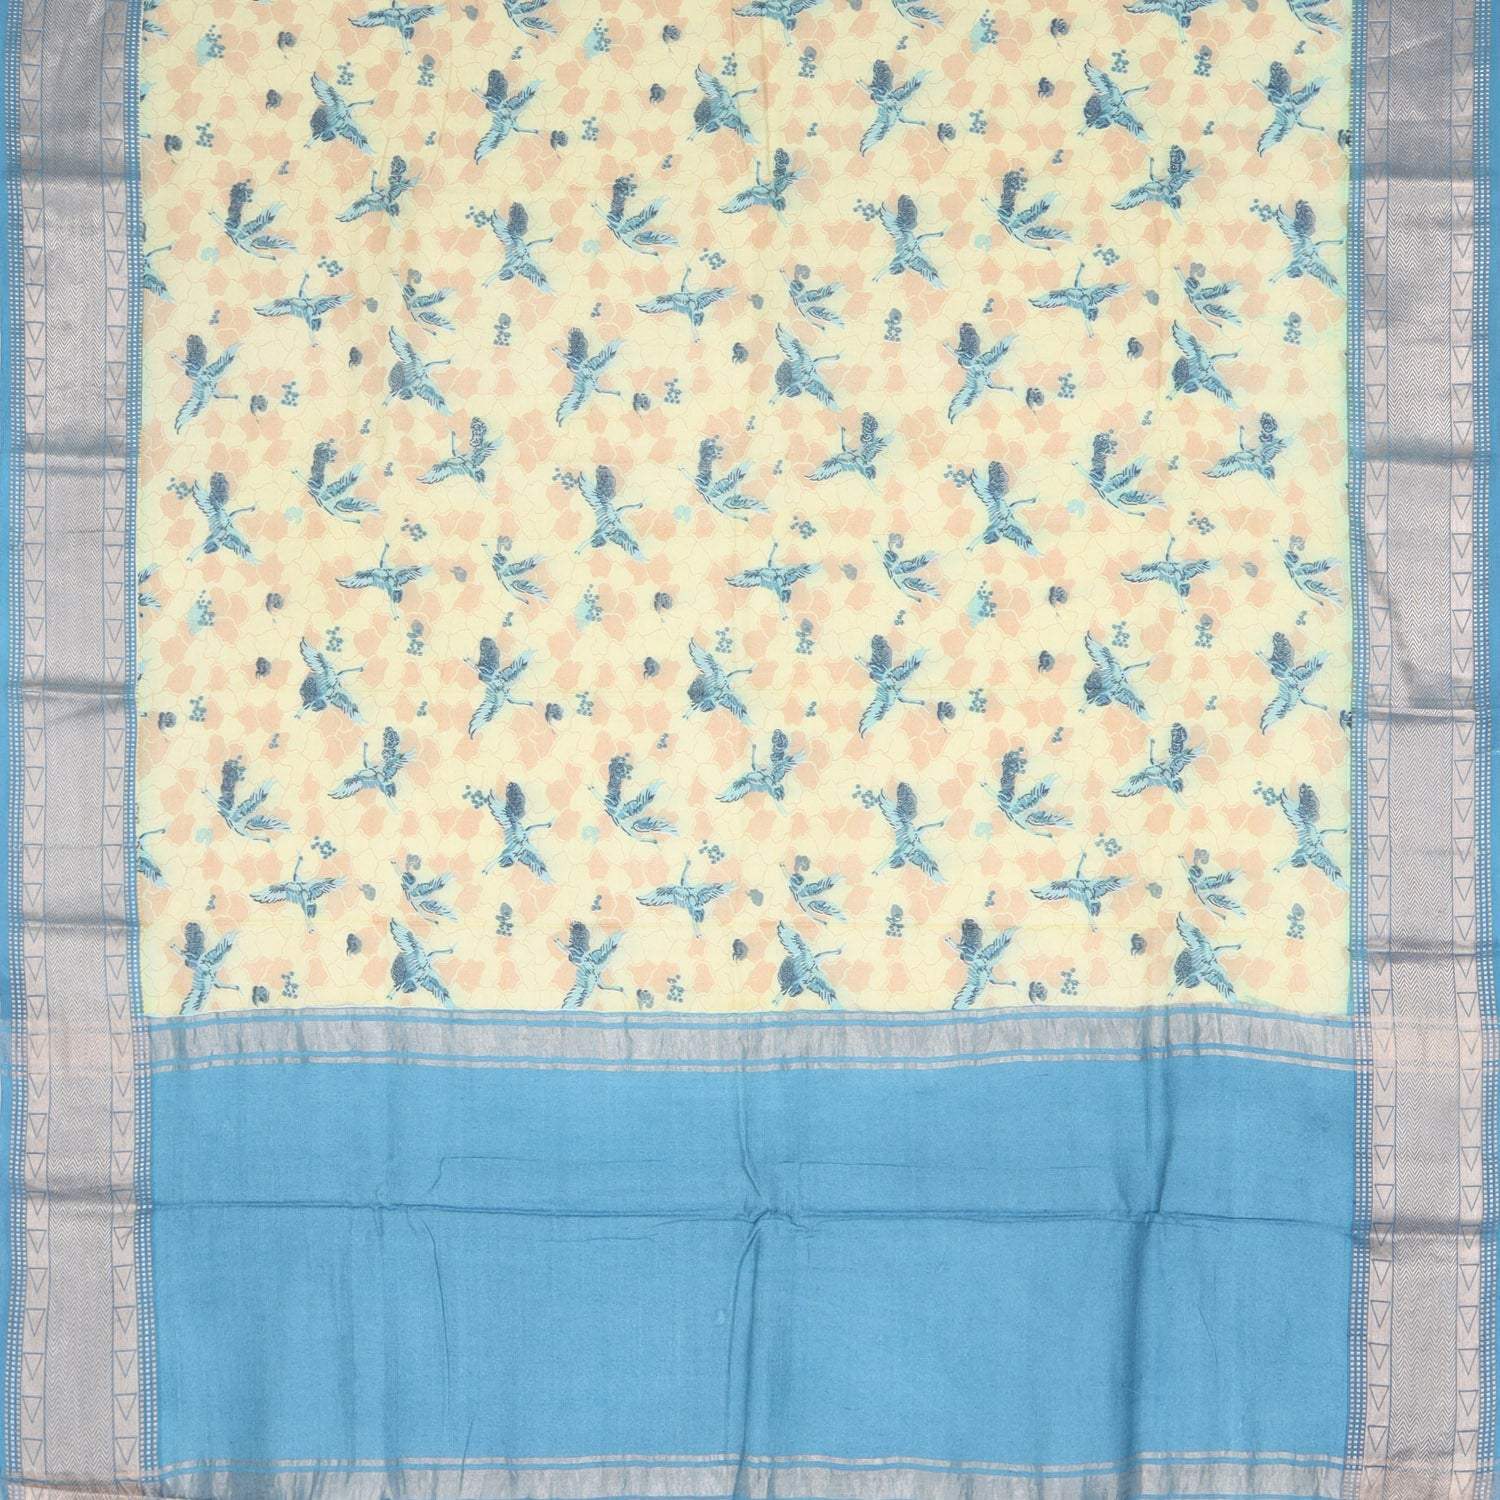 Butter Yellow Cotton Saree With Bird Printed Motifs - Singhania's